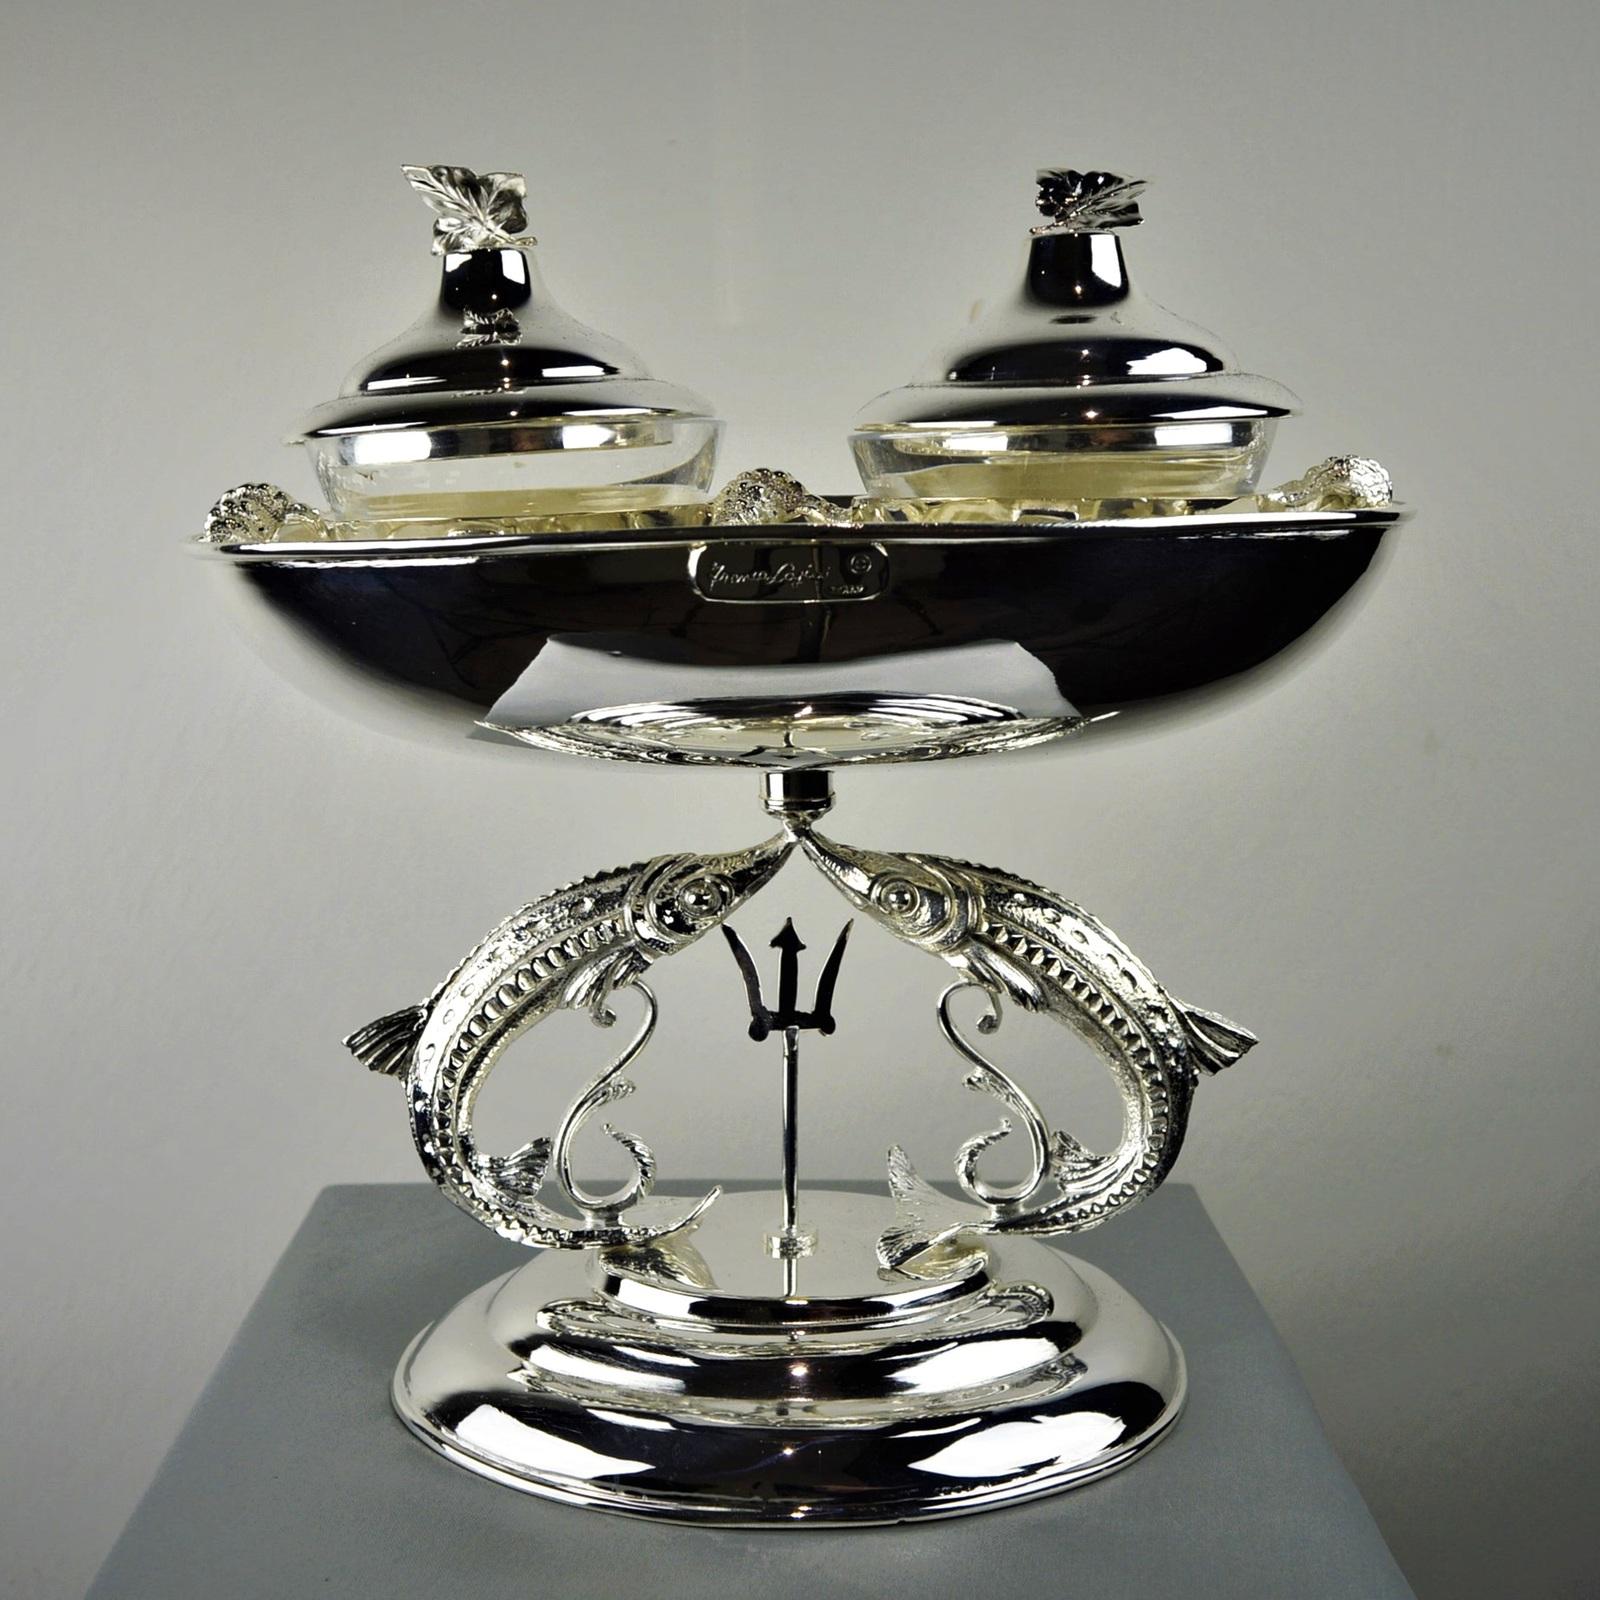 A stunning addition to a traditional decor and a lavish accent for a special occasion, this caviar holder features two oval cups that can display two different types of caviar for a truly luxurious experience. The glass cups are covered with lids